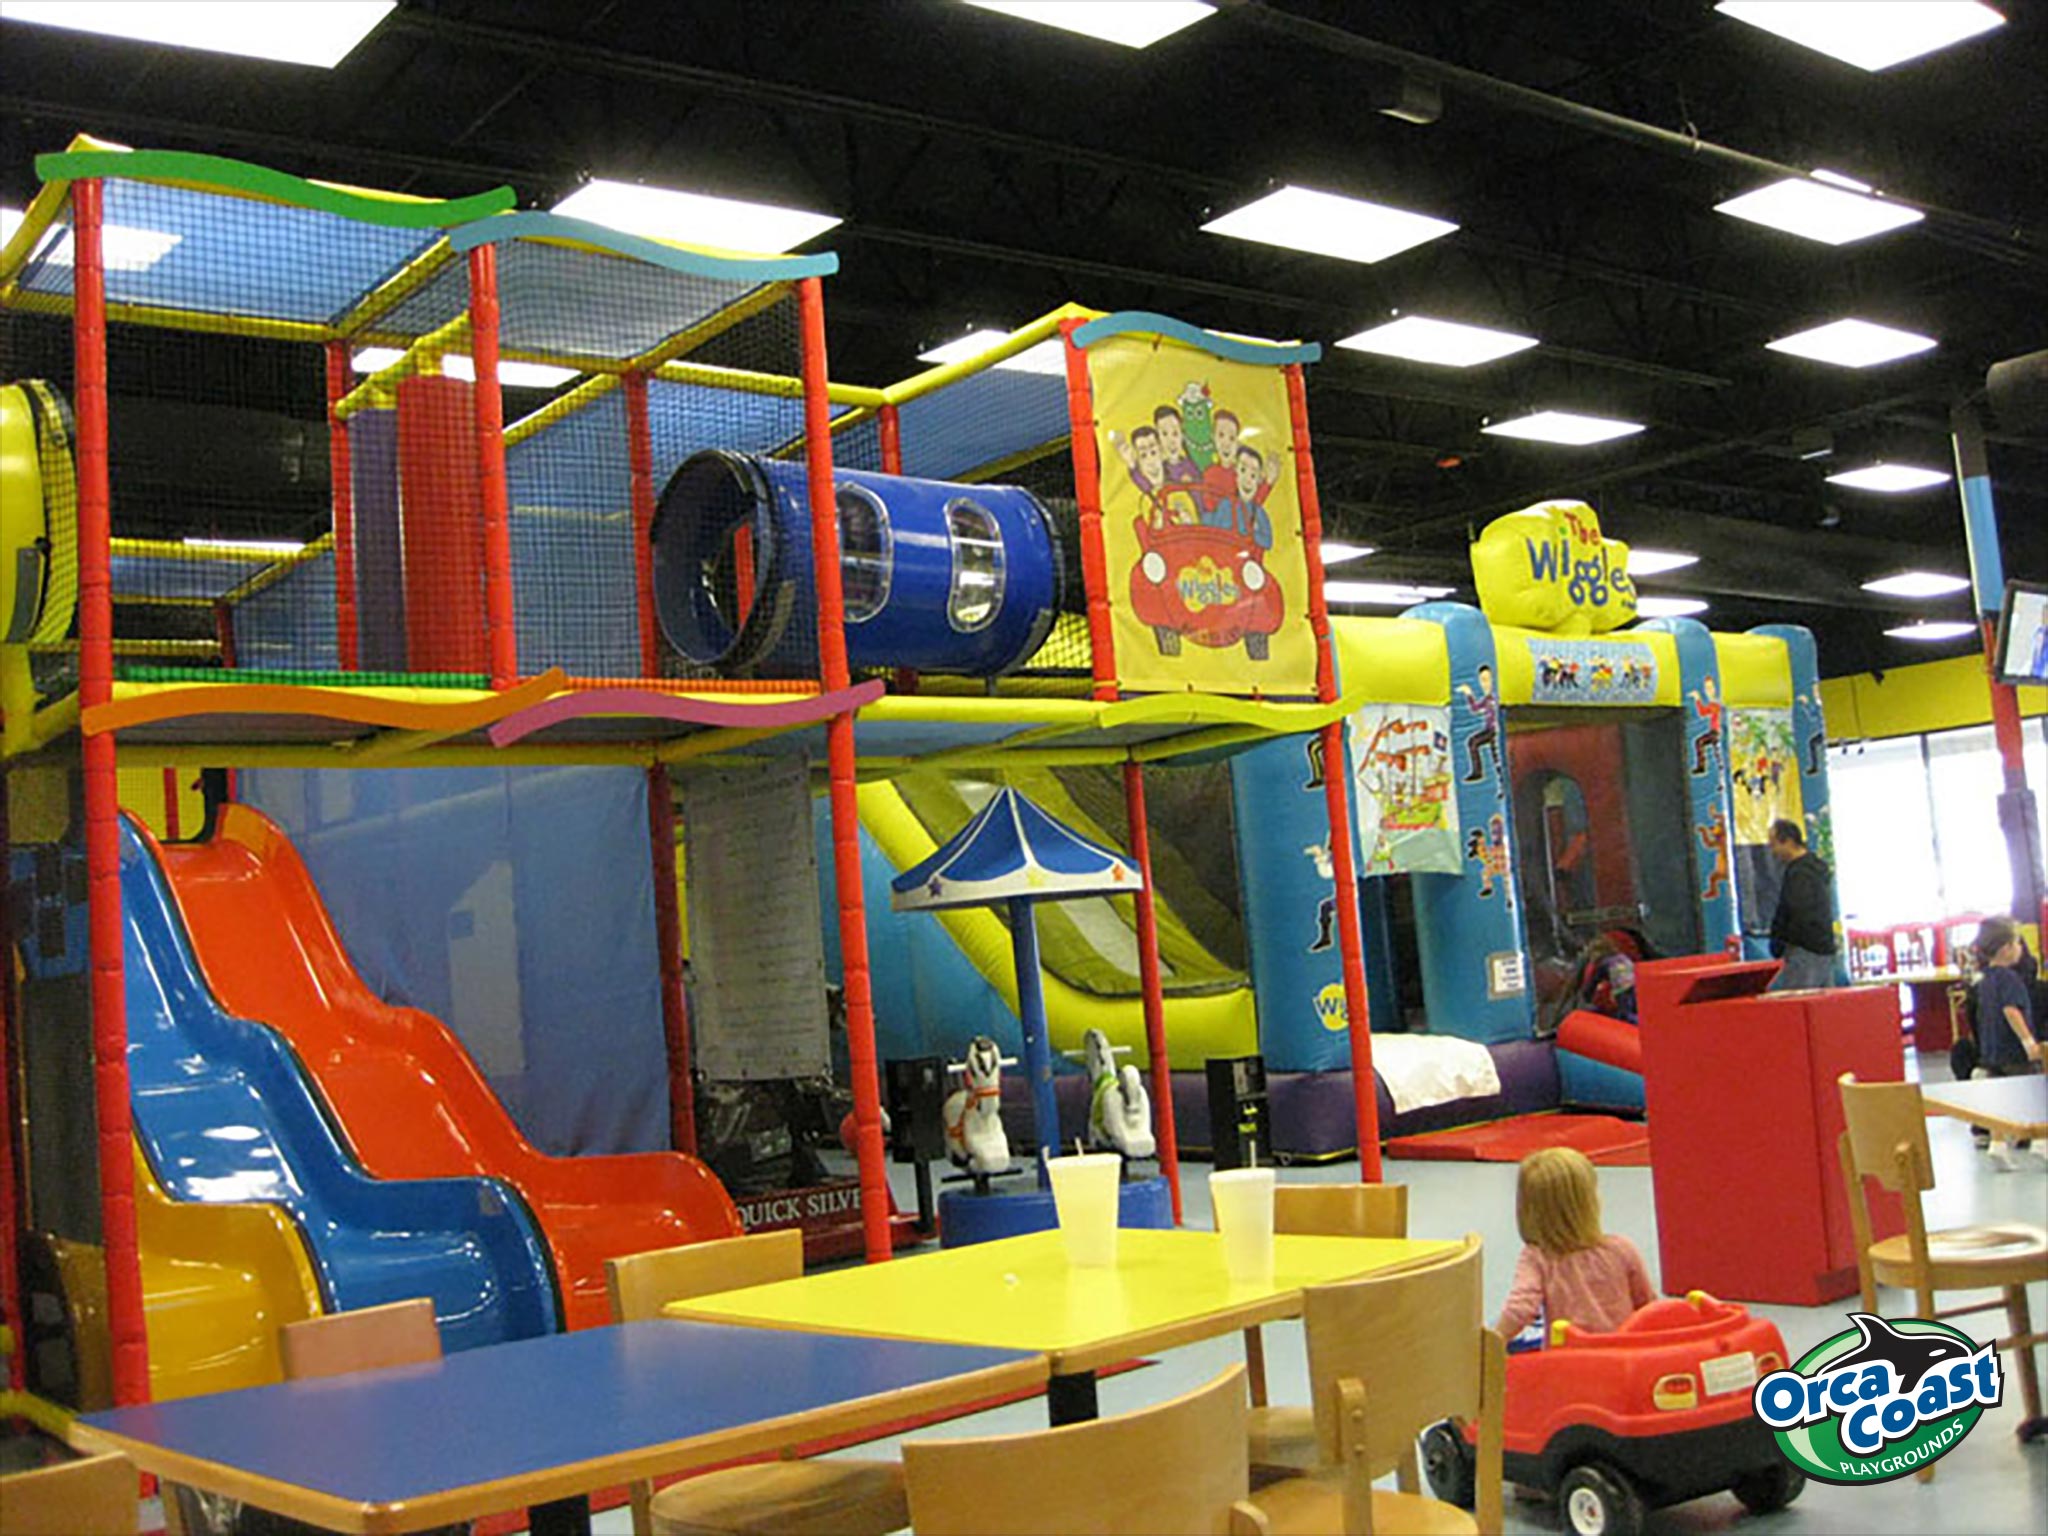 The Wiggly Center Indoor Playground Equipment